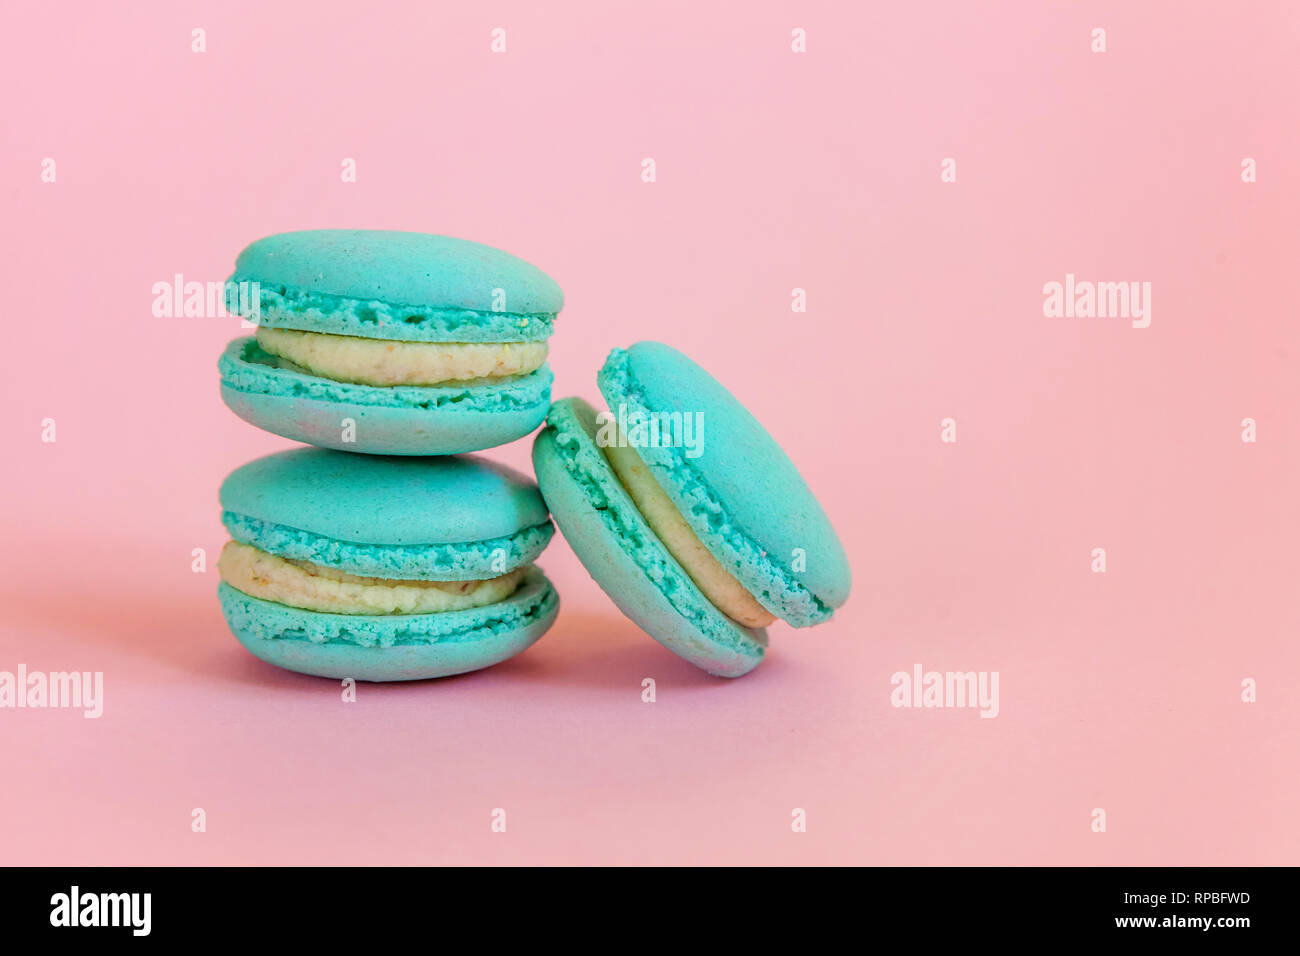 Sweet almond colorful unicorn blue macaron or macaroon dessert cake isolated on trendy pink pastel background. French sweet cookie. Minimal food baker Stock Photo